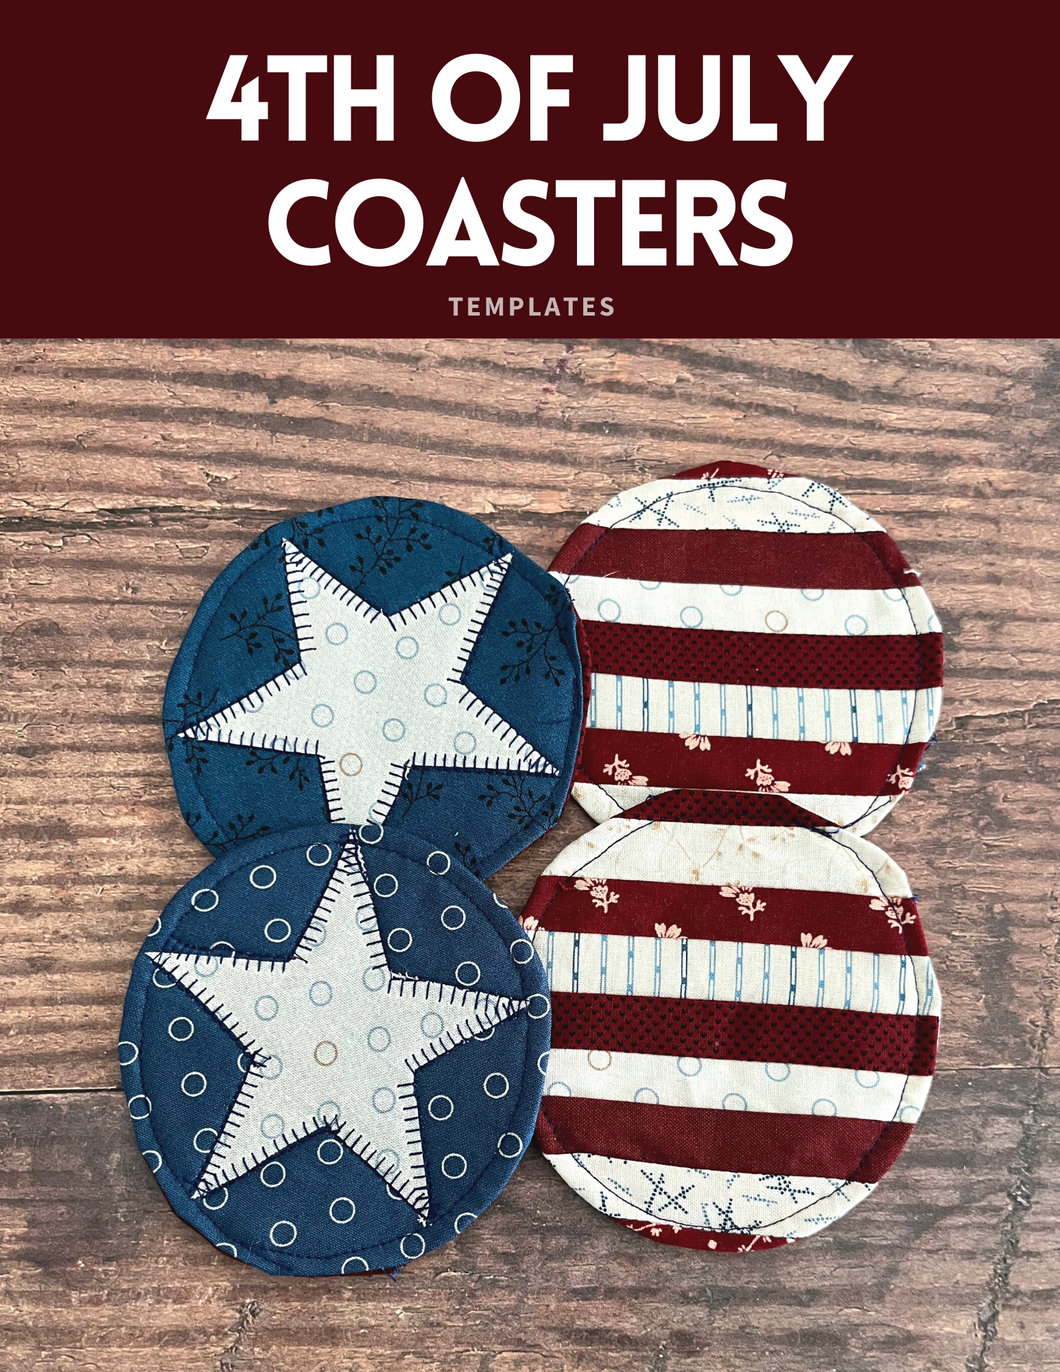 4th of July Coasters - FREE template